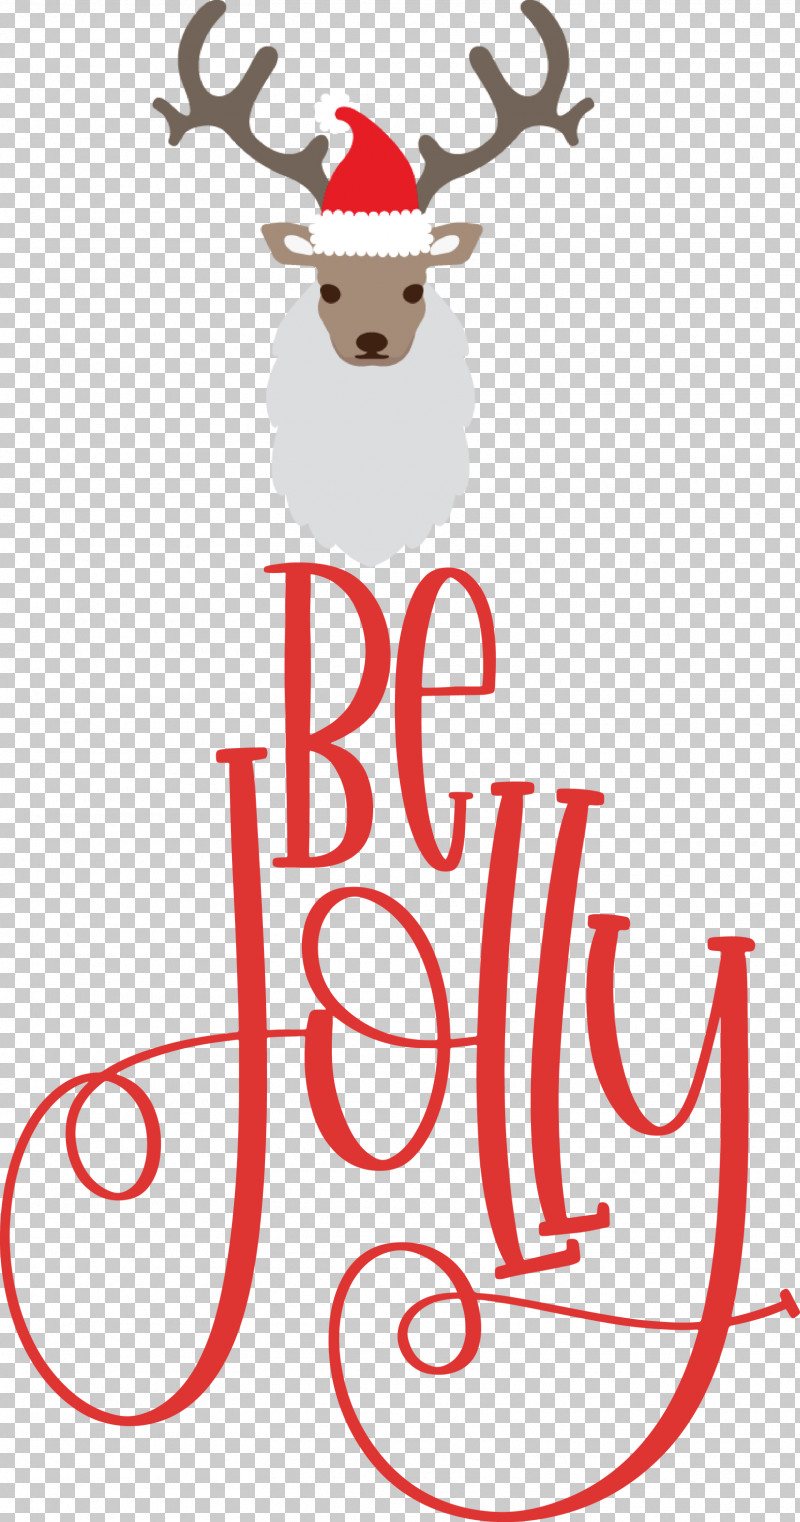 Be Jolly Christmas New Year PNG, Clipart, Be Jolly, Christmas, Christmas Archives, En Deckorarte, Mexico City Free PNG Download